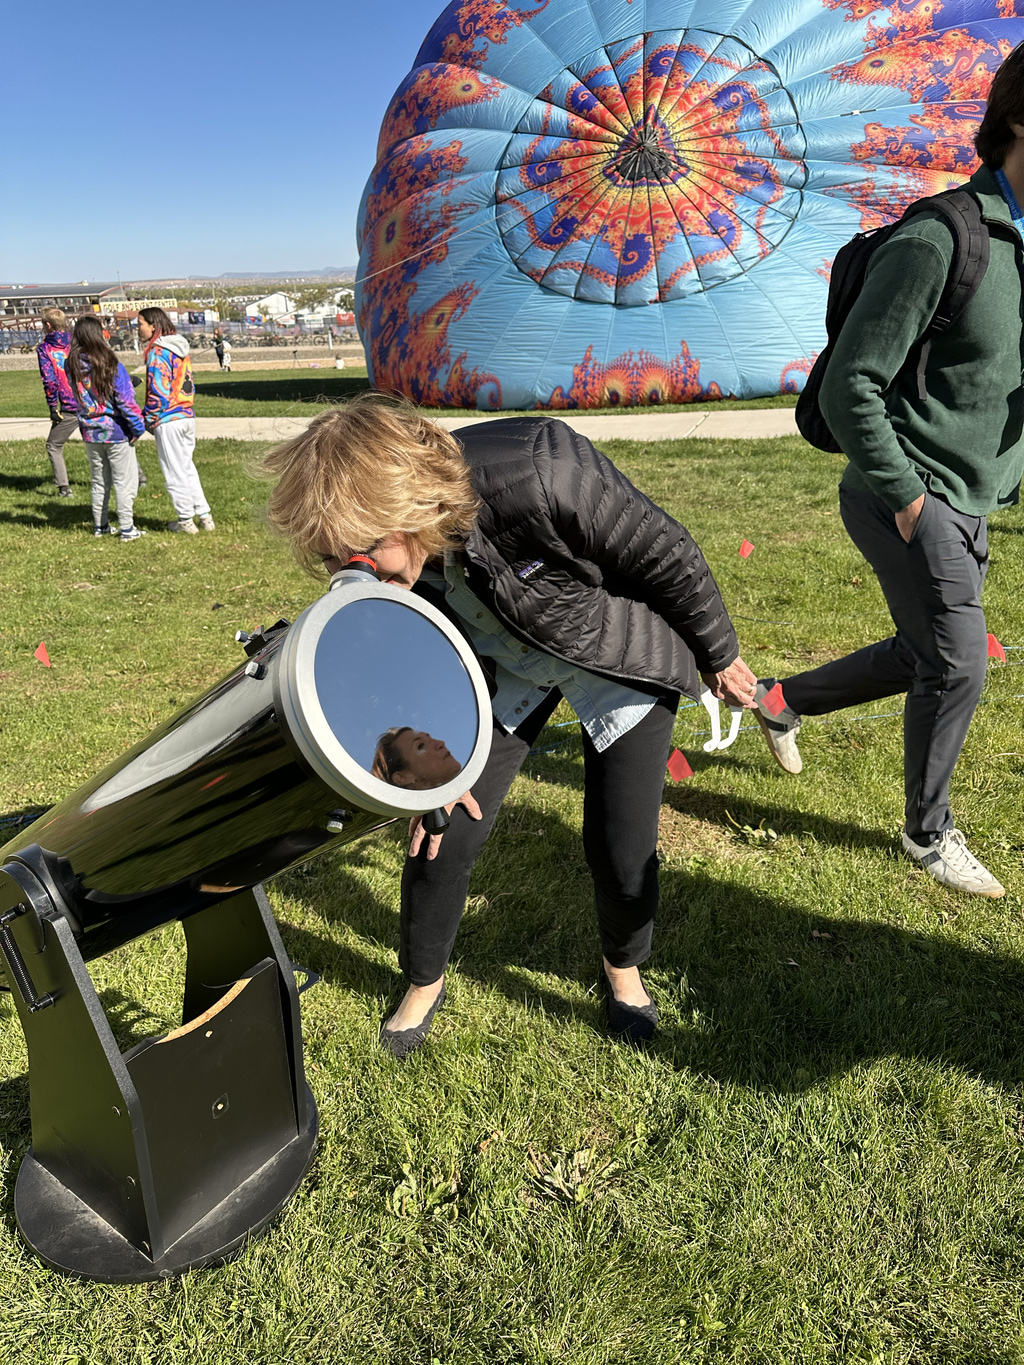 Watching the annular solar eclipse of October 14, 2023, in Albuquerque, New Mexico, through a solar safe telescope. Binoculars and telescopes can ONLY be used to look at the Sun or watch an eclipse when used with solar filters specially designed for that purpose. Wearing solar viewing glasses will not protect your eyes when used with binoculars or telescopes – you must have an appropriate filter.Image Cedit: NASA